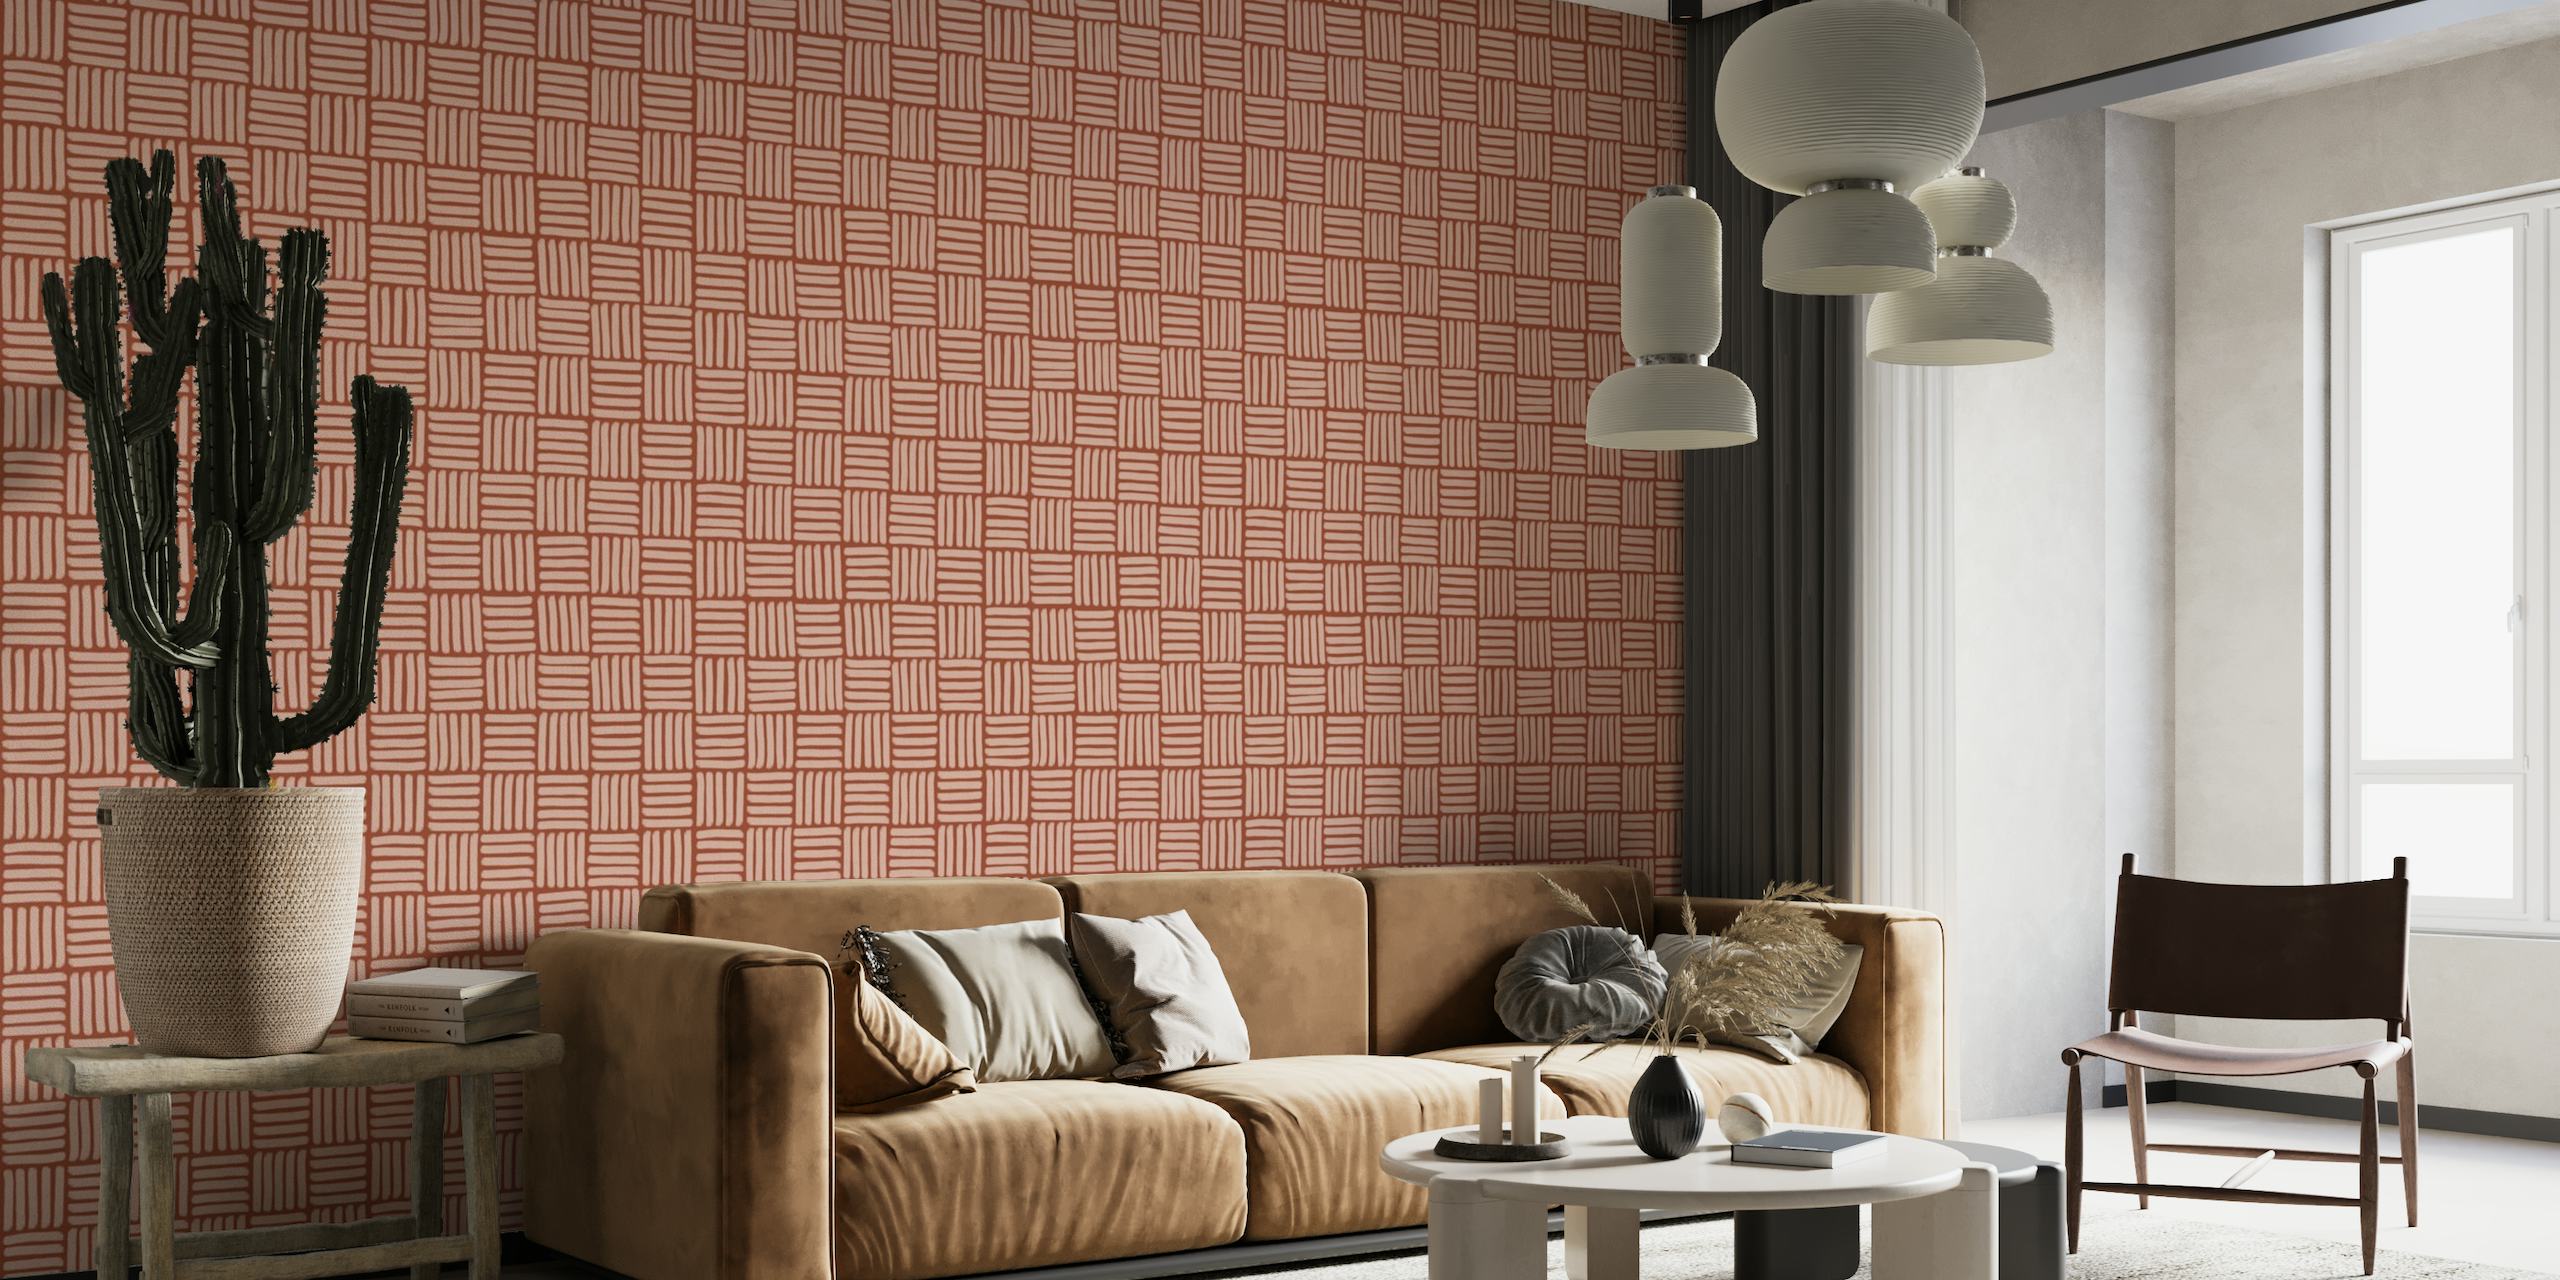 Basketweave on Brick Red - Small wallpaper